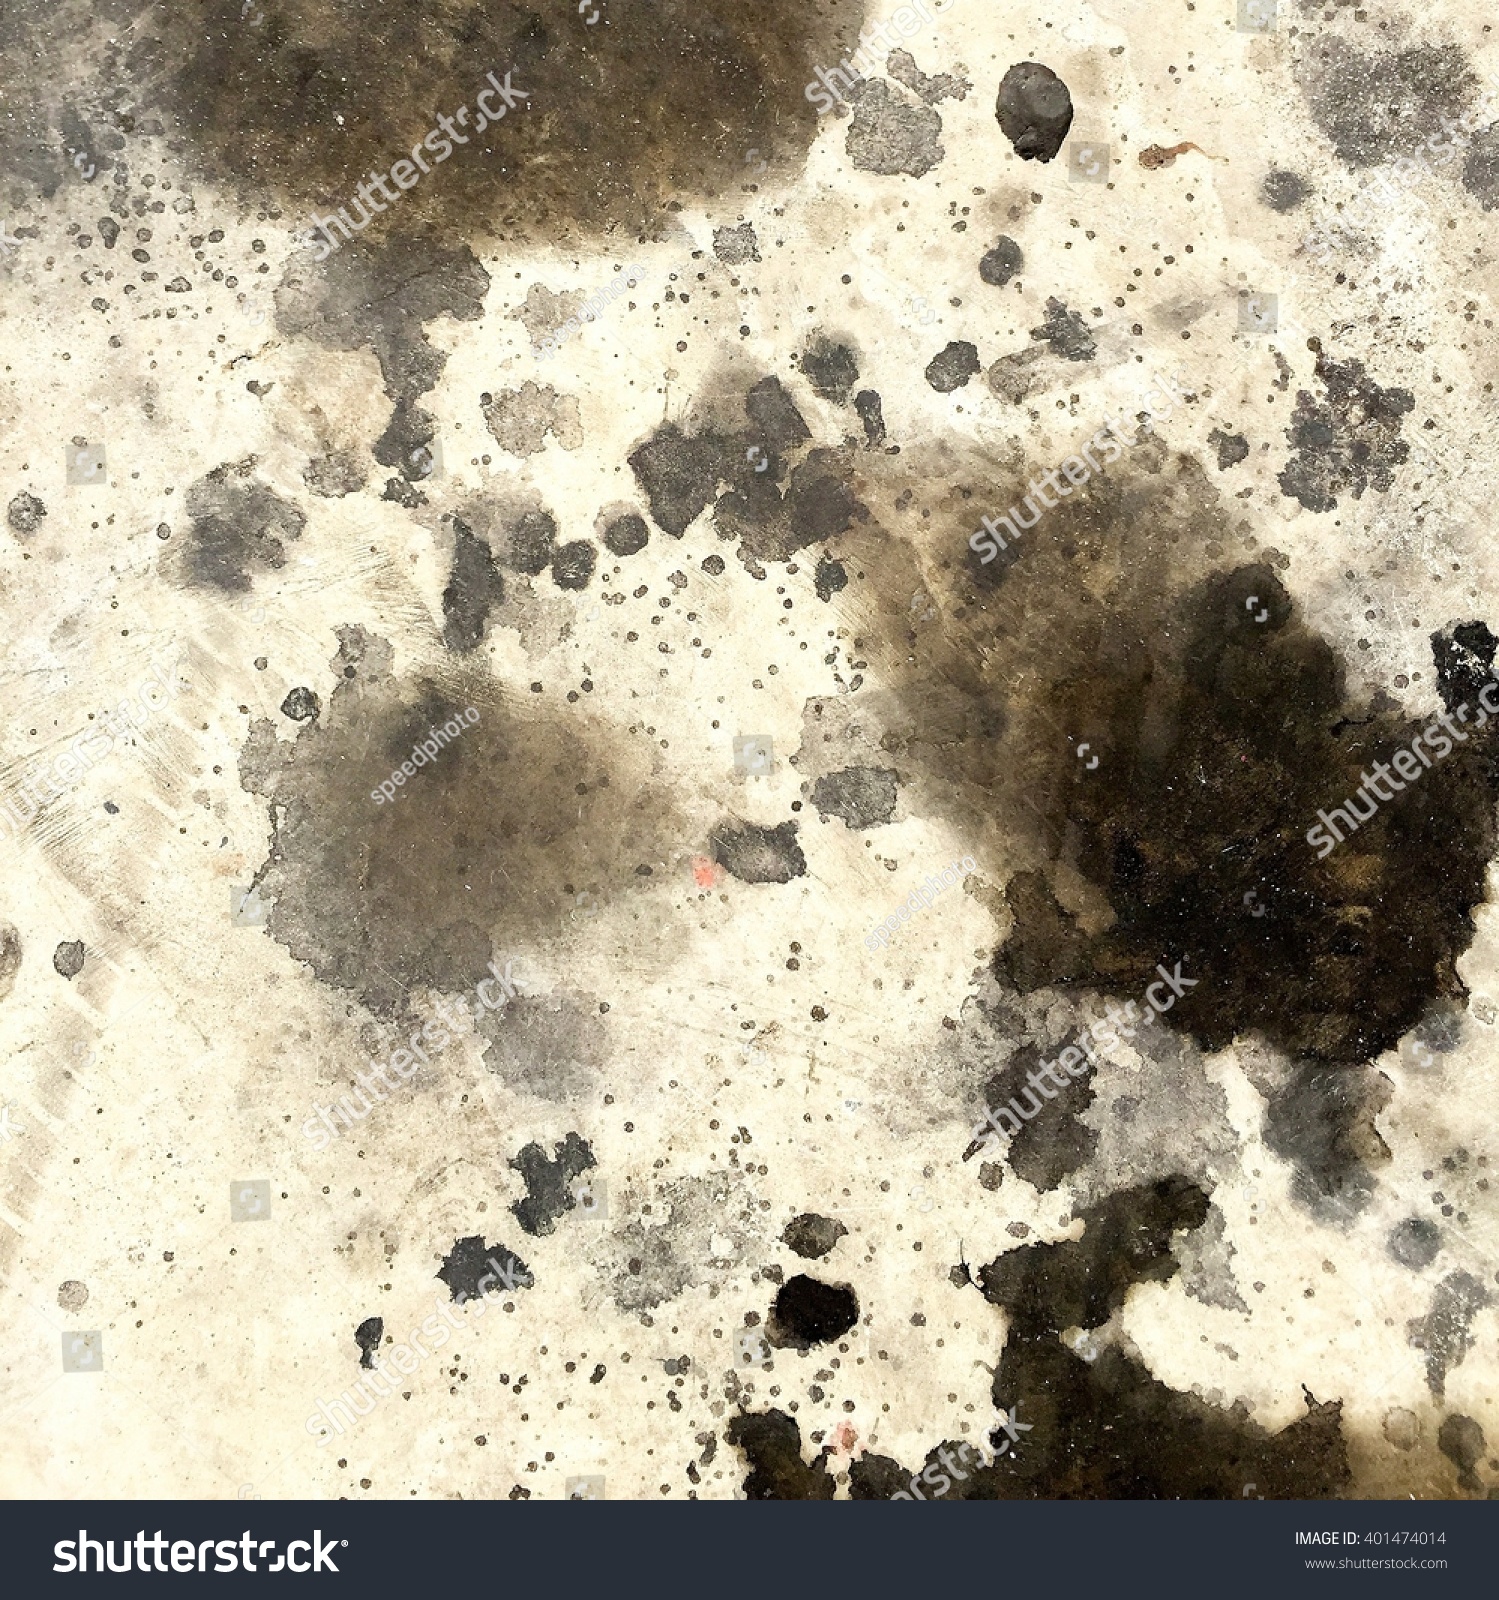 Dirty oil stain Cement floor texture #401474014